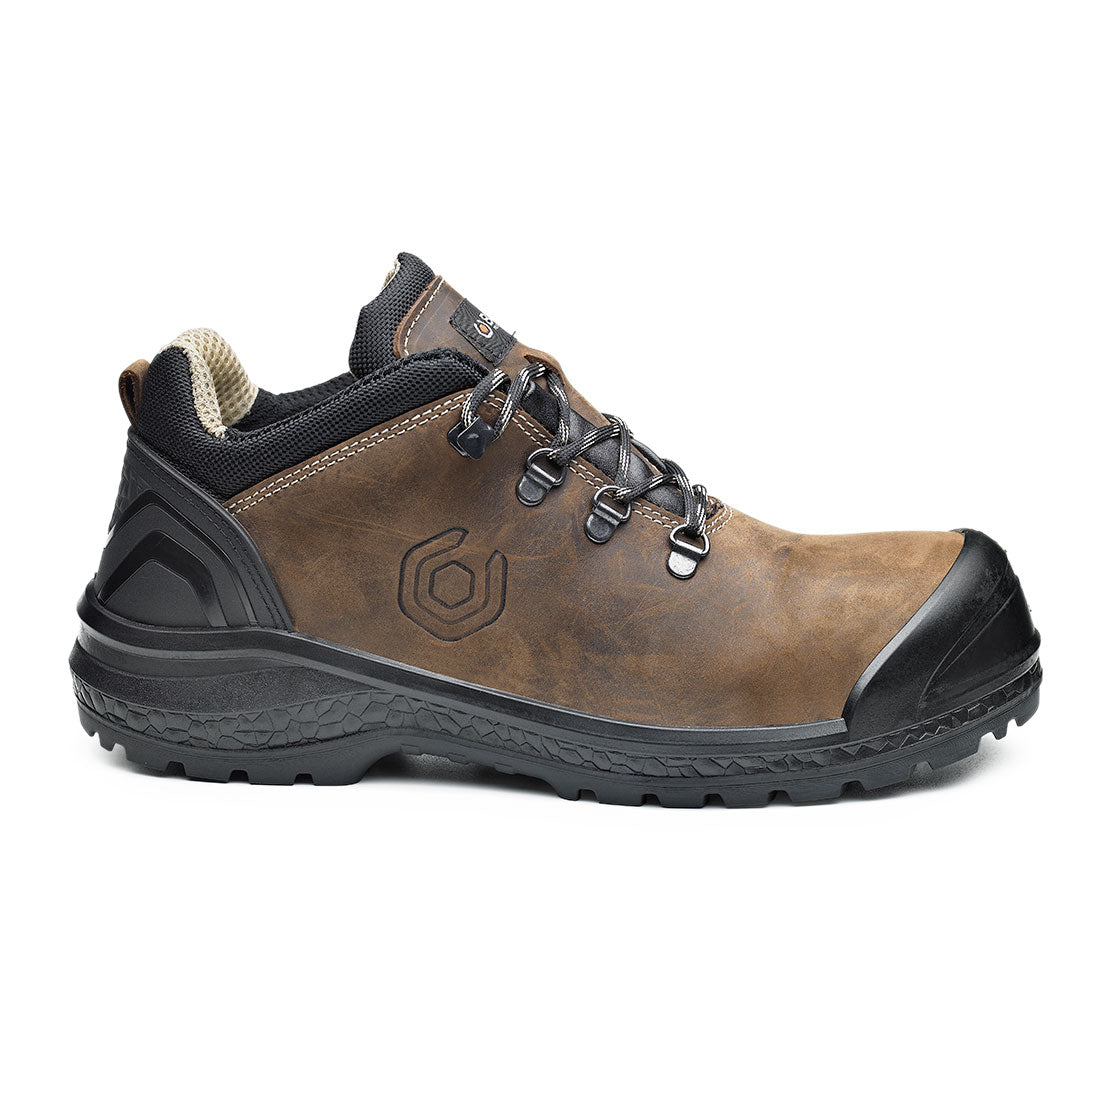 Base Be-Strong Safety Shoes S3 HRO CI HI